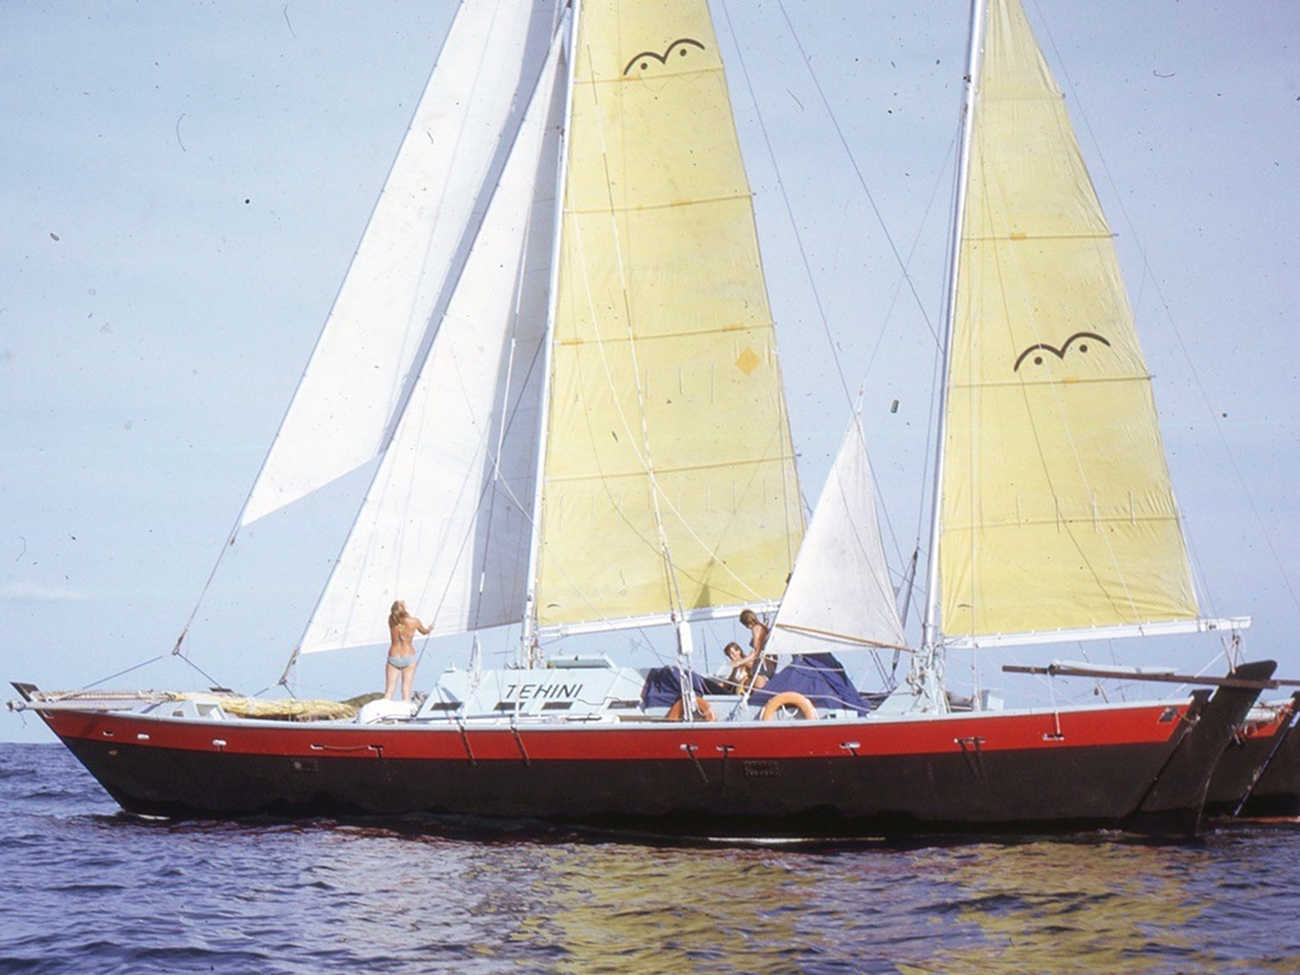 Red and black hulled Tehini with yellow sails, view from the starboard bow